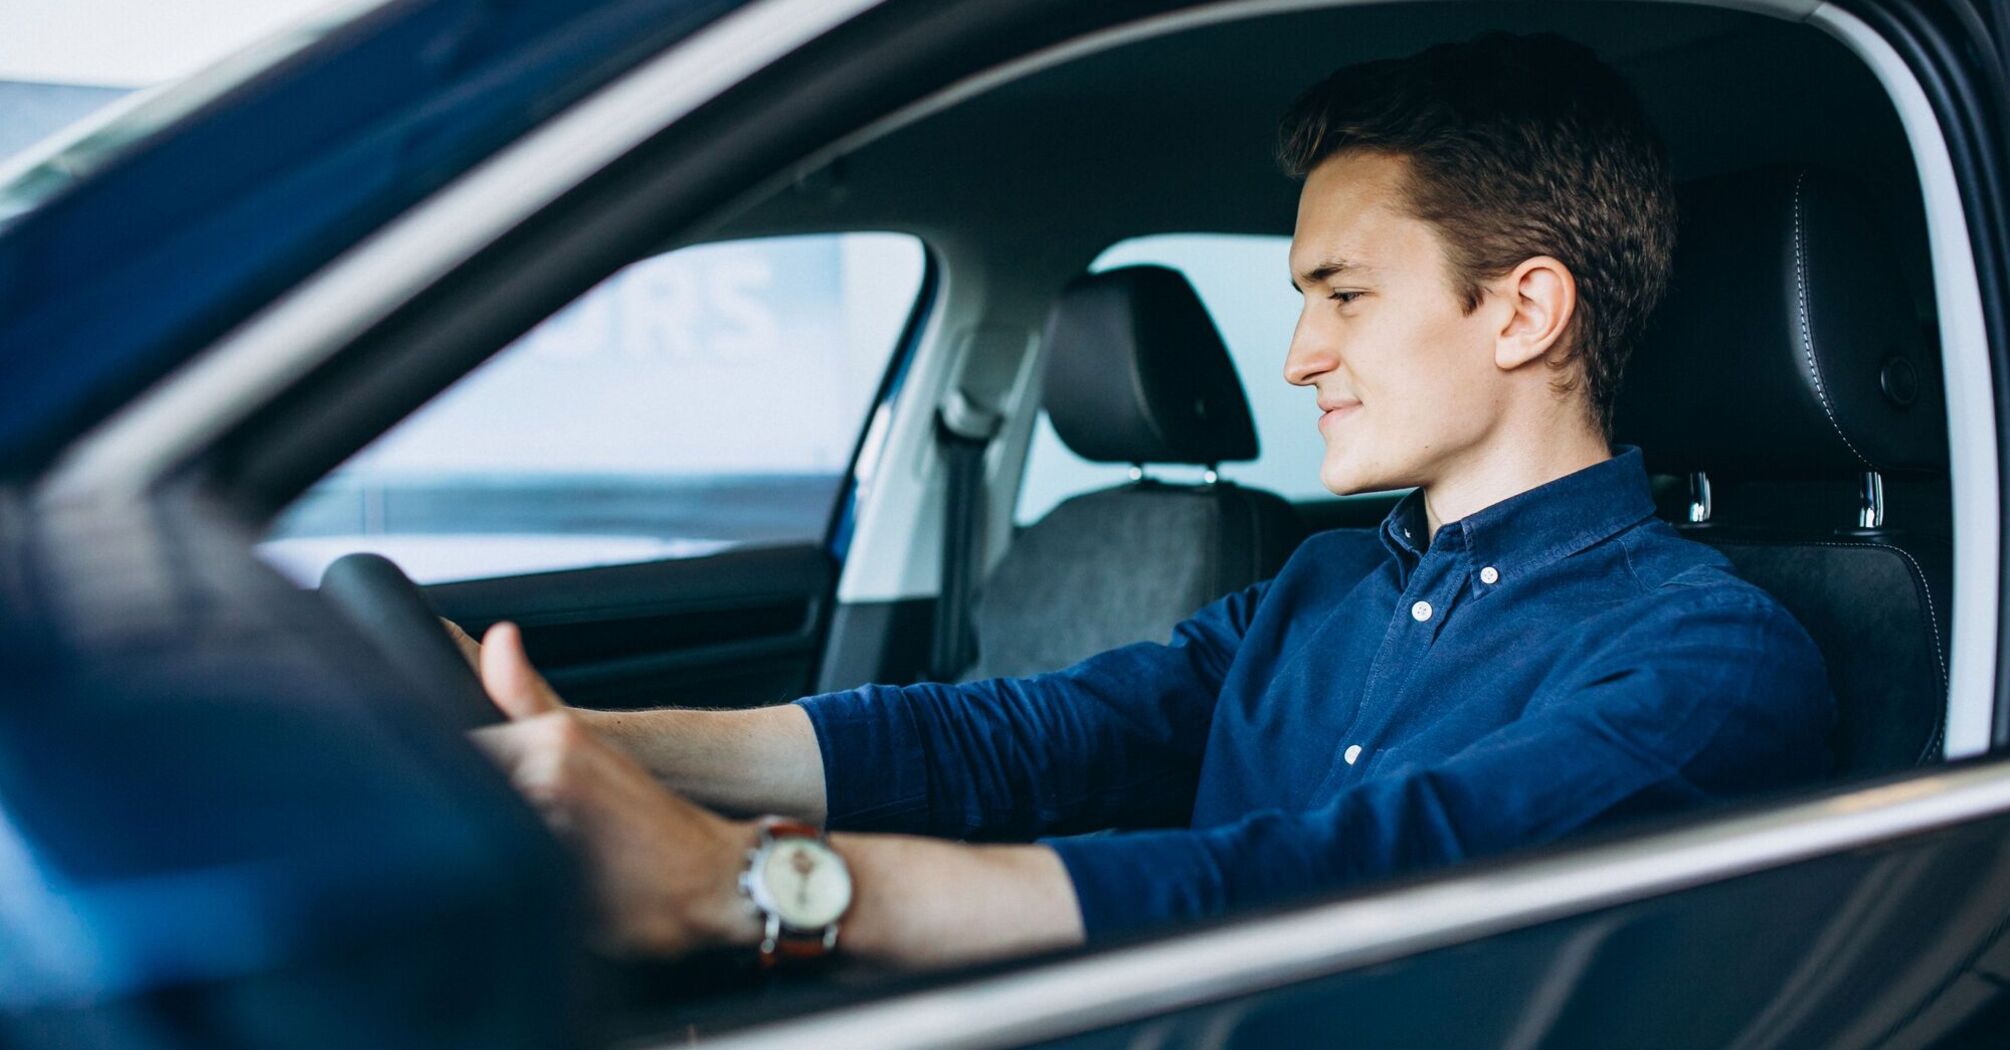 To sit behind the wheel at 14: in which countries is the youngest age for drivers